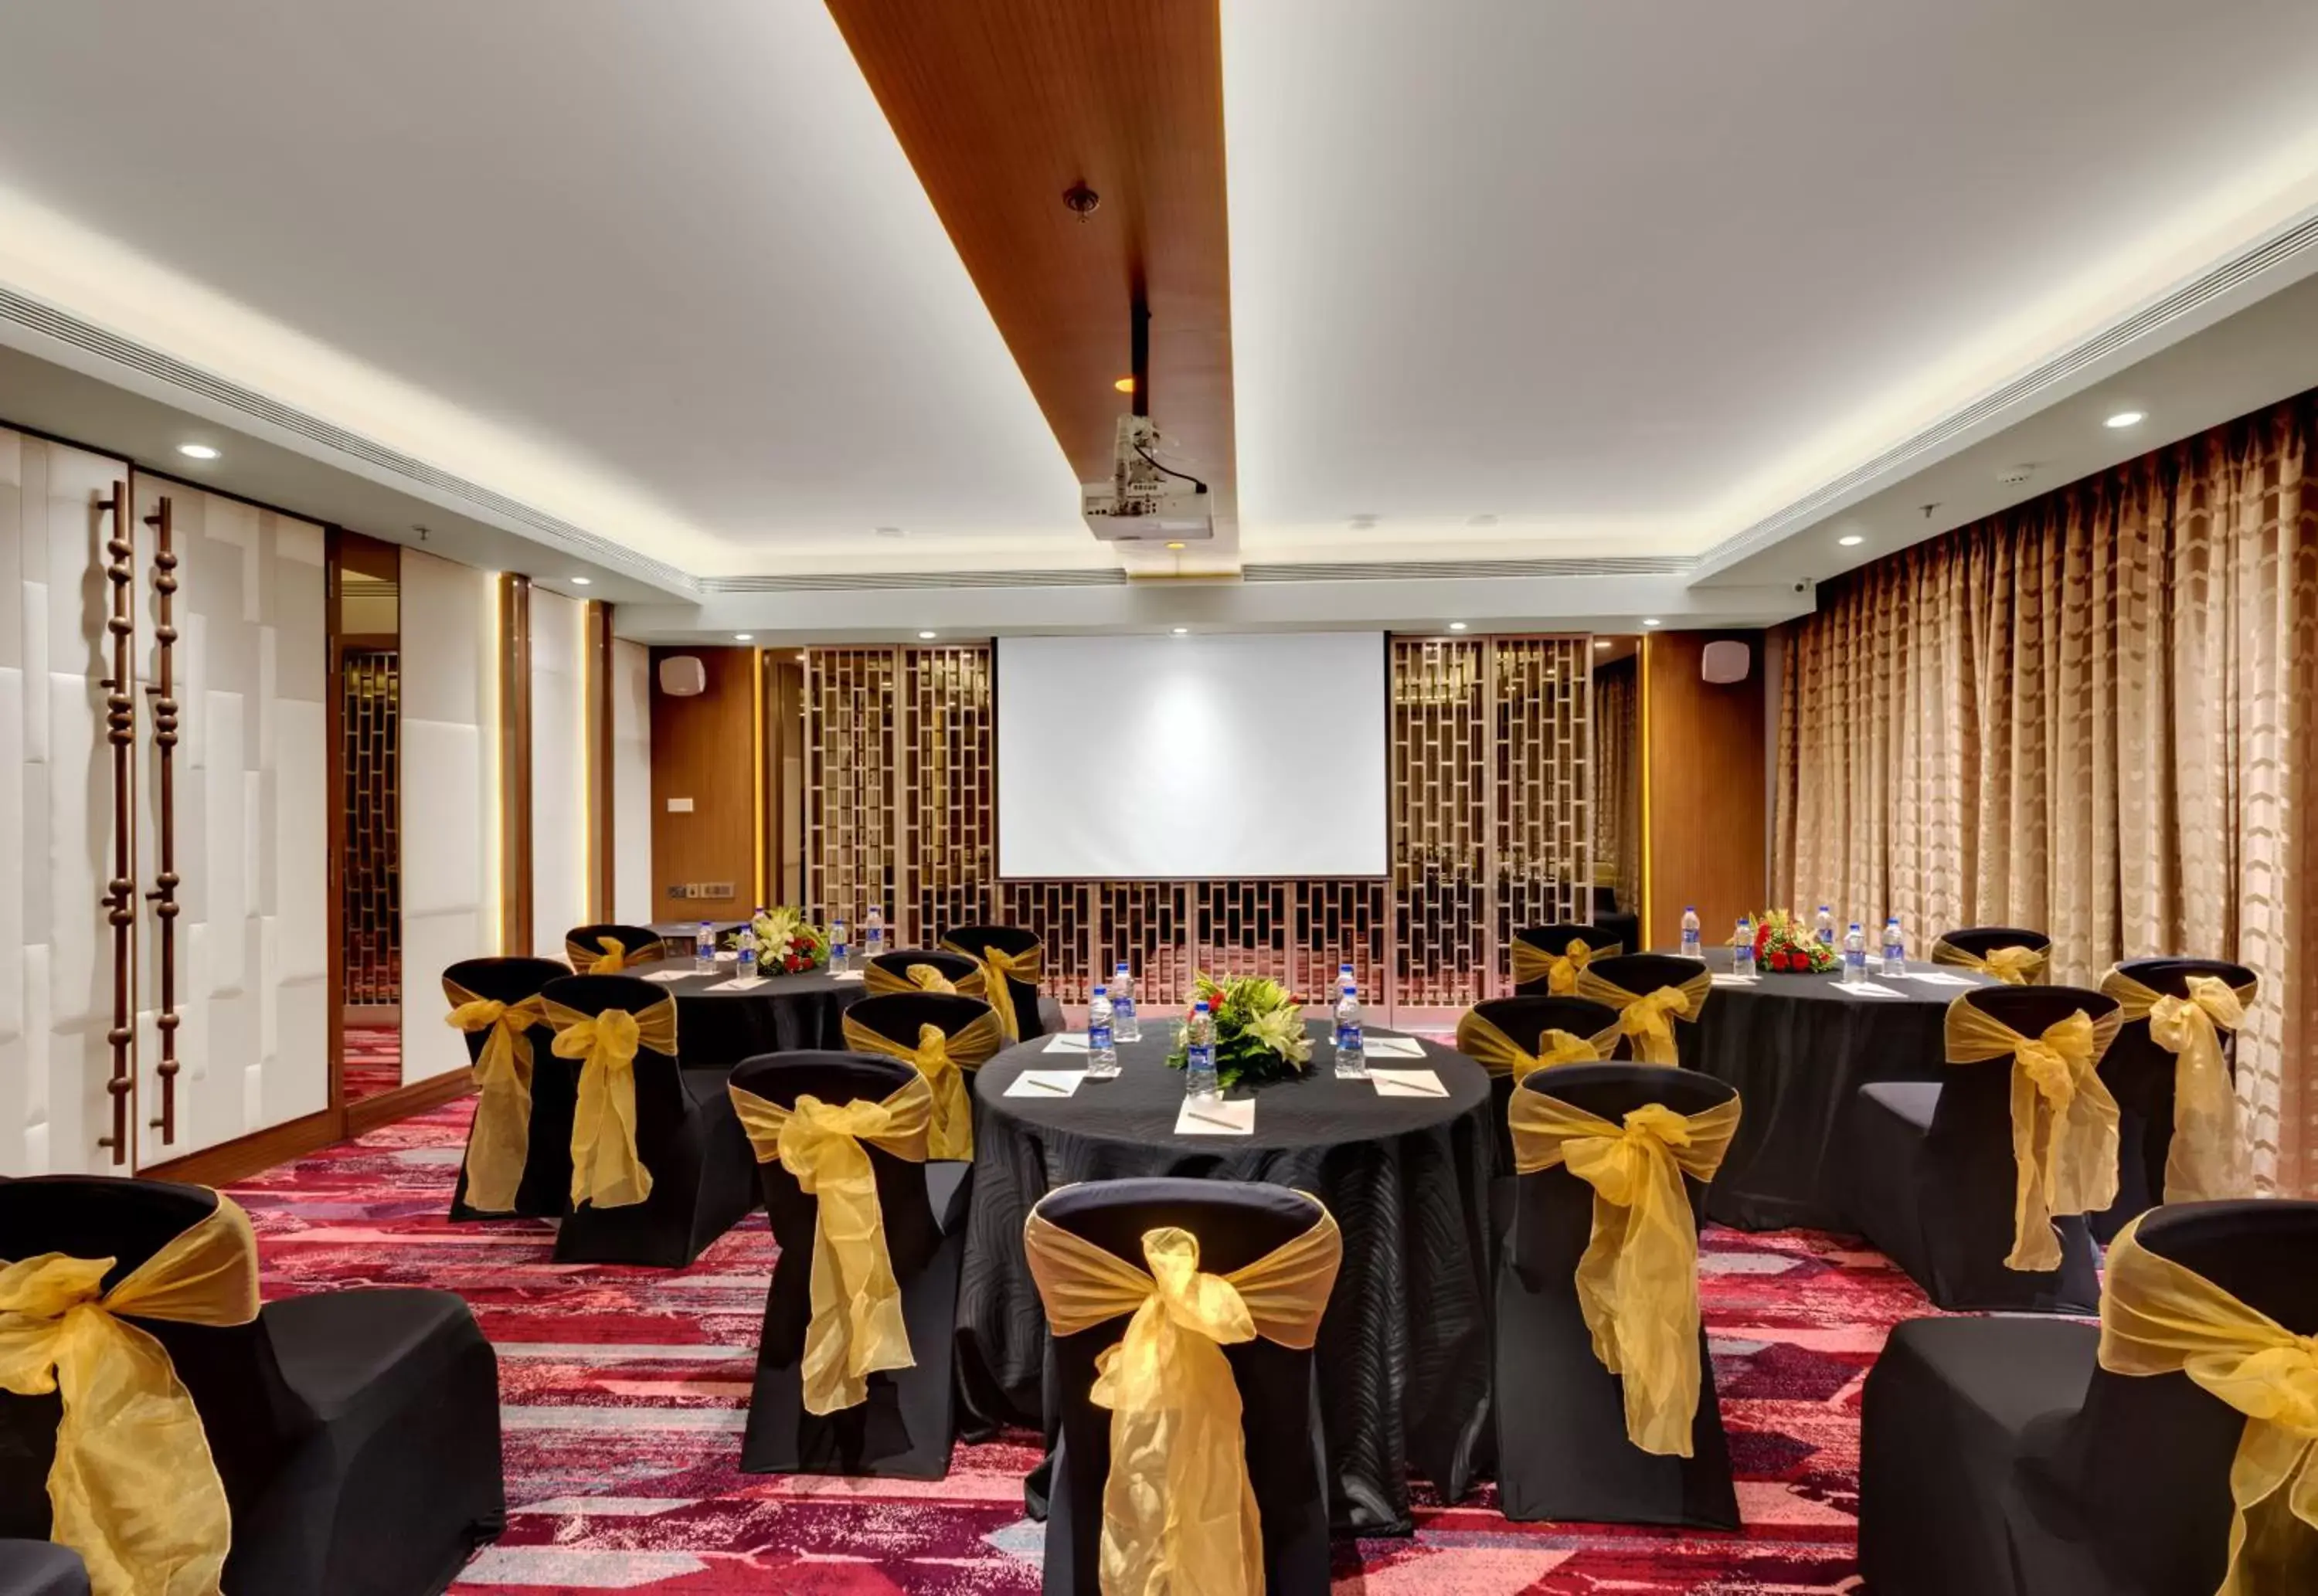 Meeting/conference room, Banquet Facilities in The Fern - Goregaon